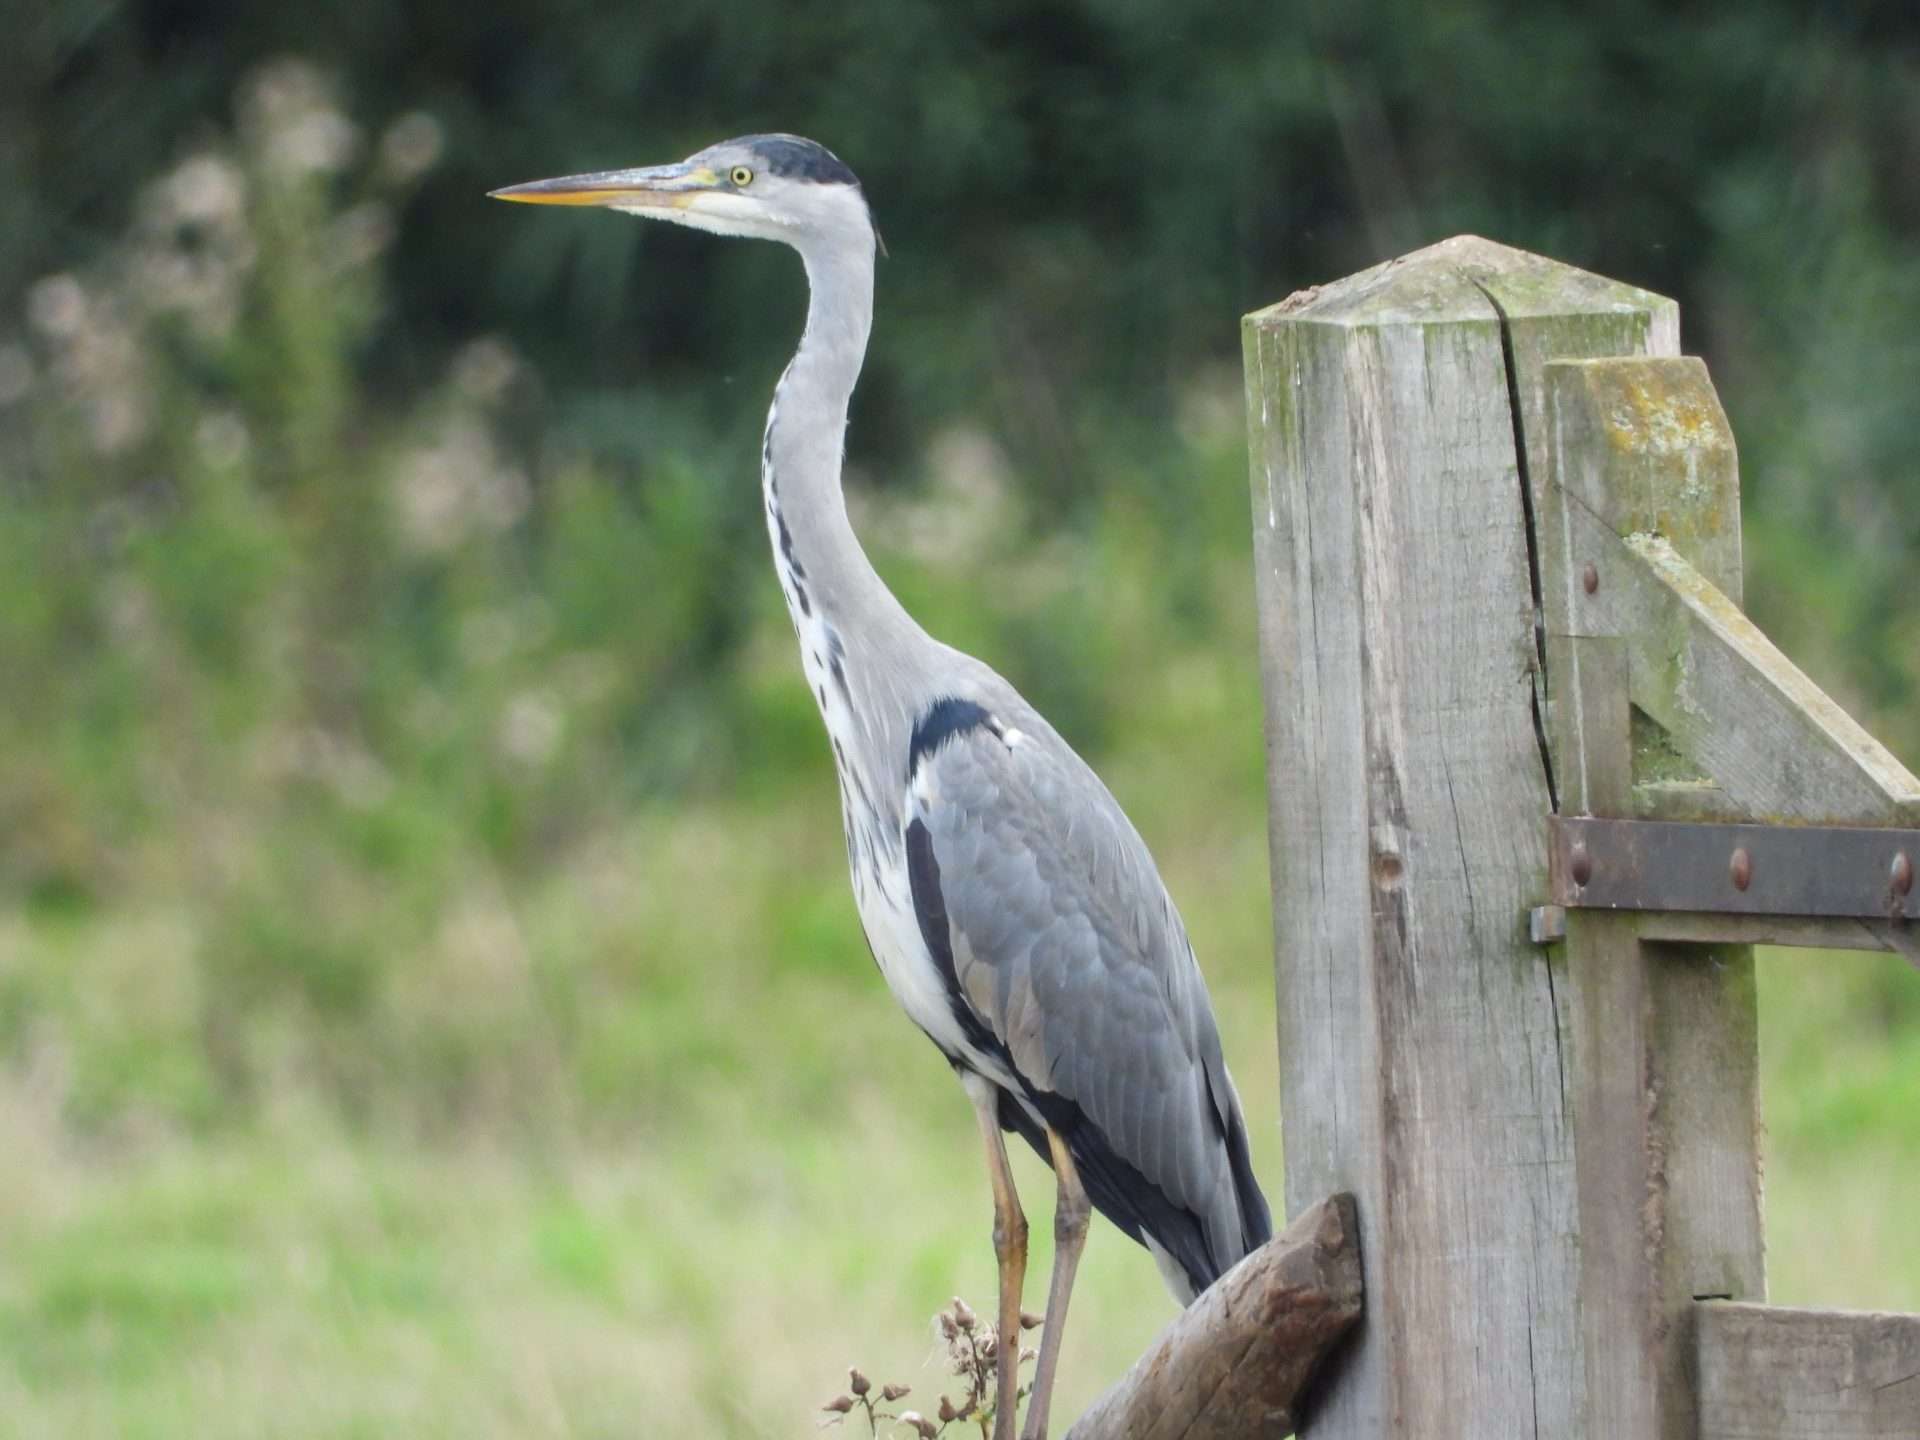 Grey Heron by Kenneth Bradley at Exminster marshes RSPB